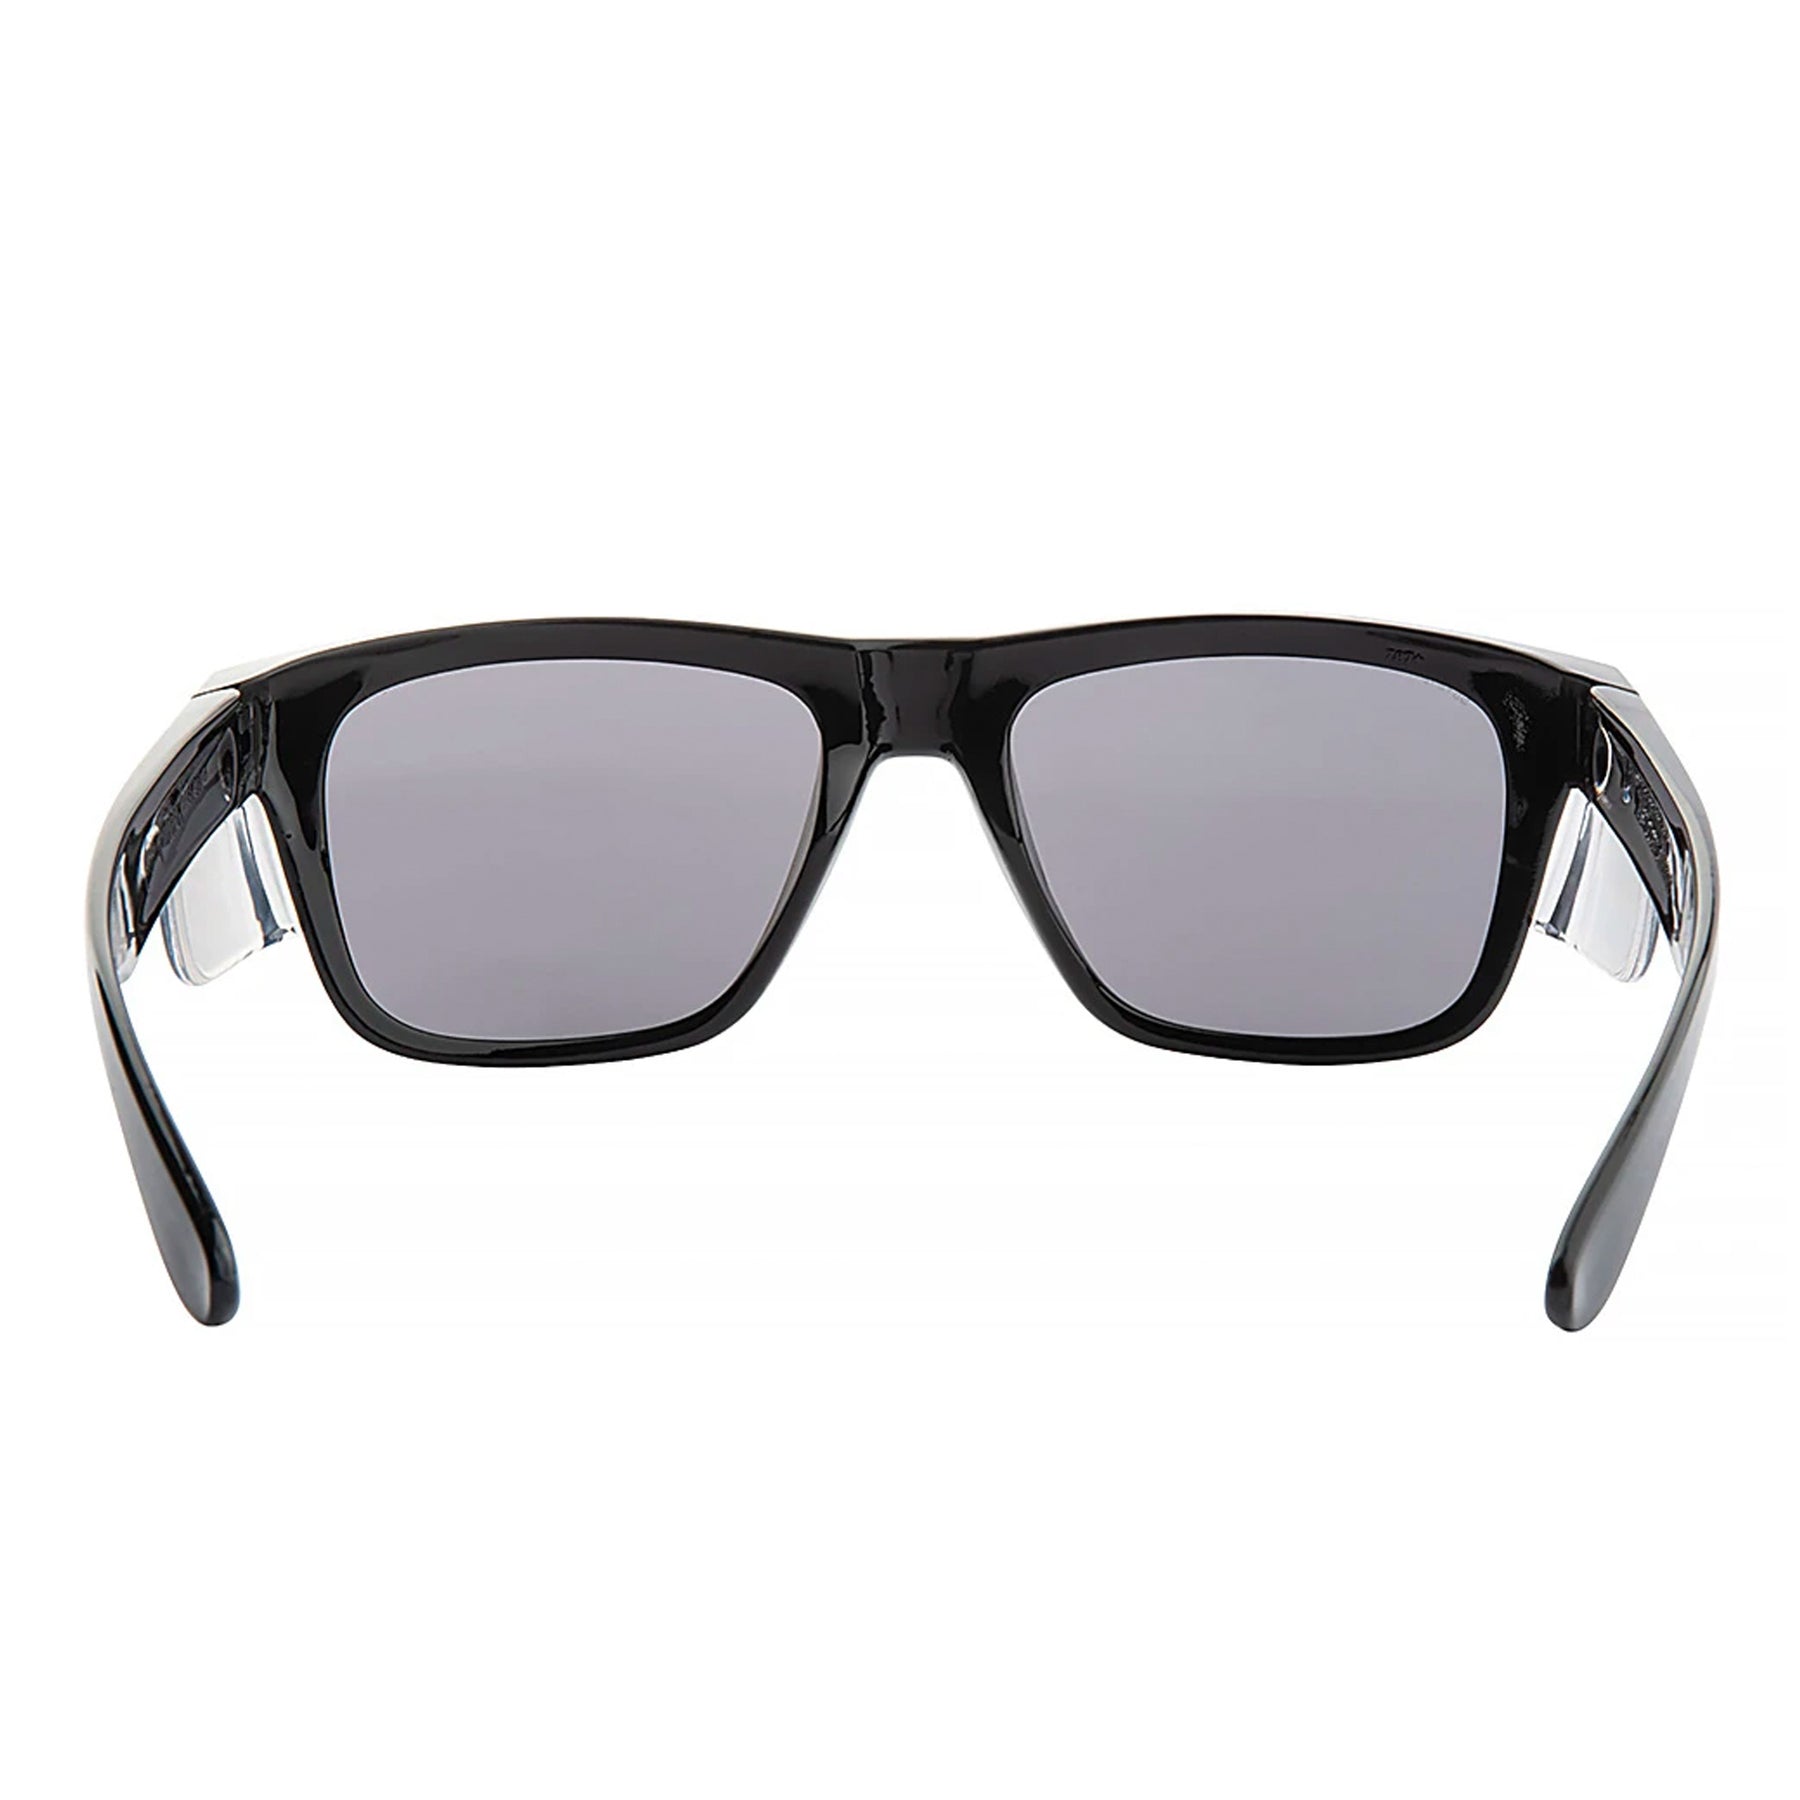 safe style fusions black frame glasses with polarised lens